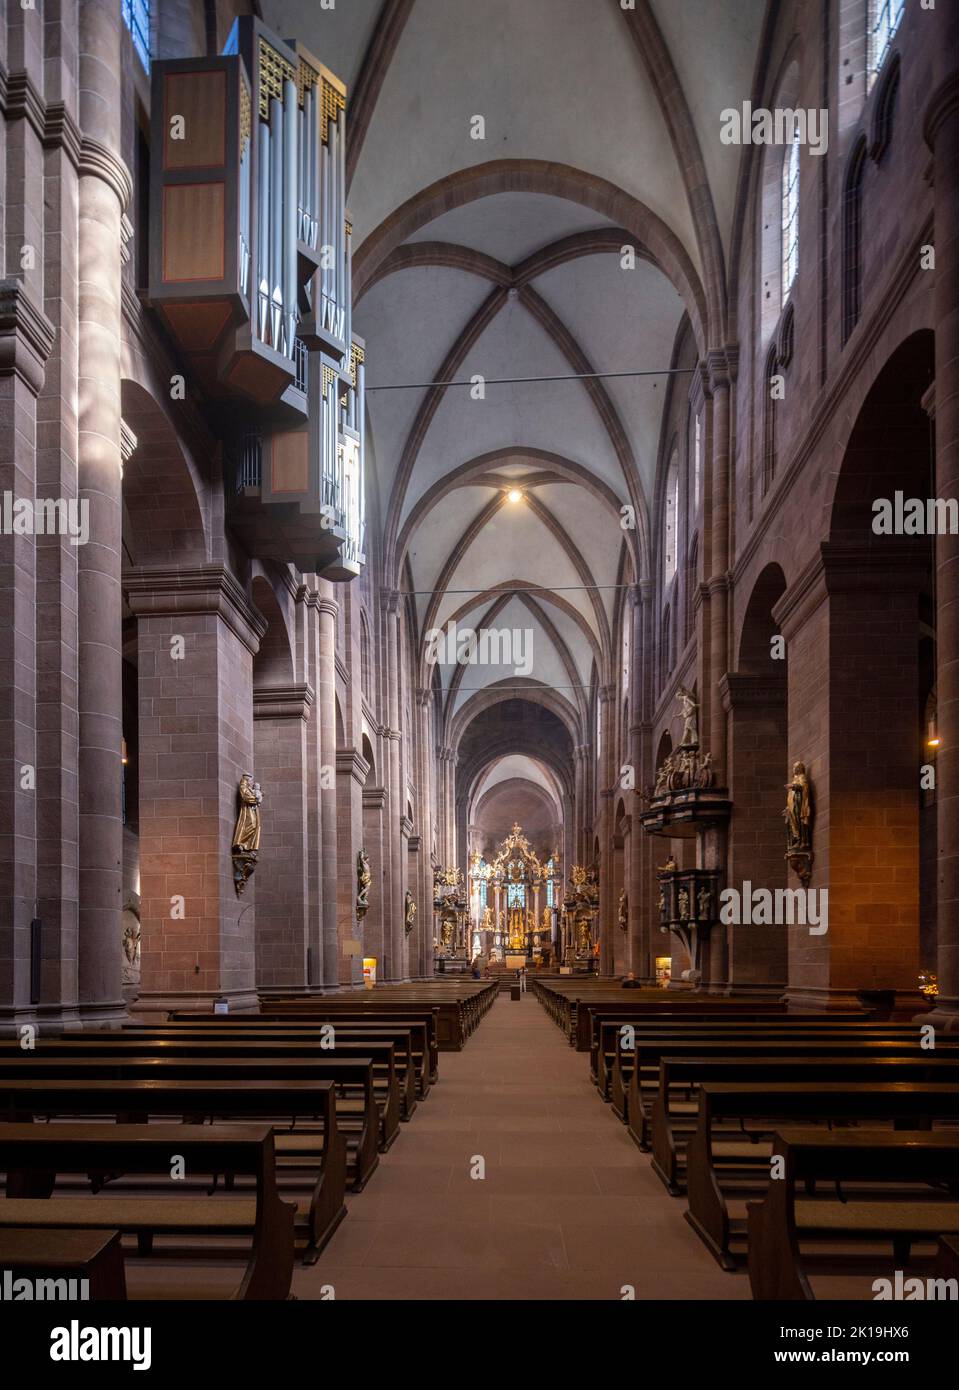 nave, St Peter's Cathedral, Wormser Dom, Worms, Rhineland-Palatinate, Germany Stock Photo